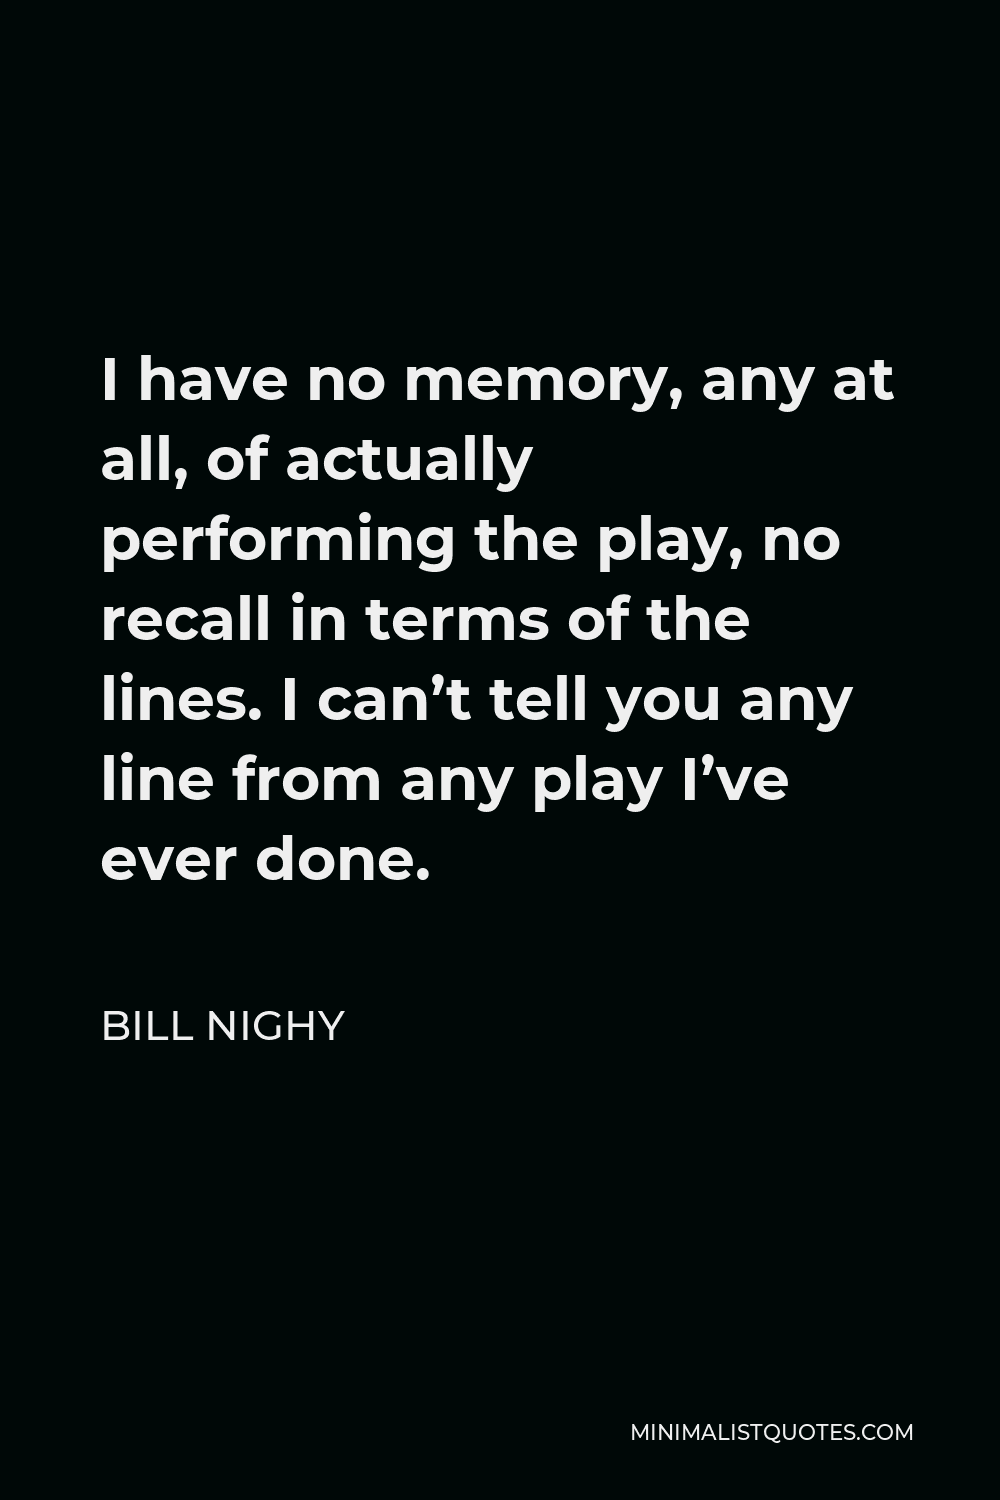 Bill Nighy Quote - I have no memory, any at all, of actually performing the play, no recall in terms of the lines. I can’t tell you any line from any play I’ve ever done.